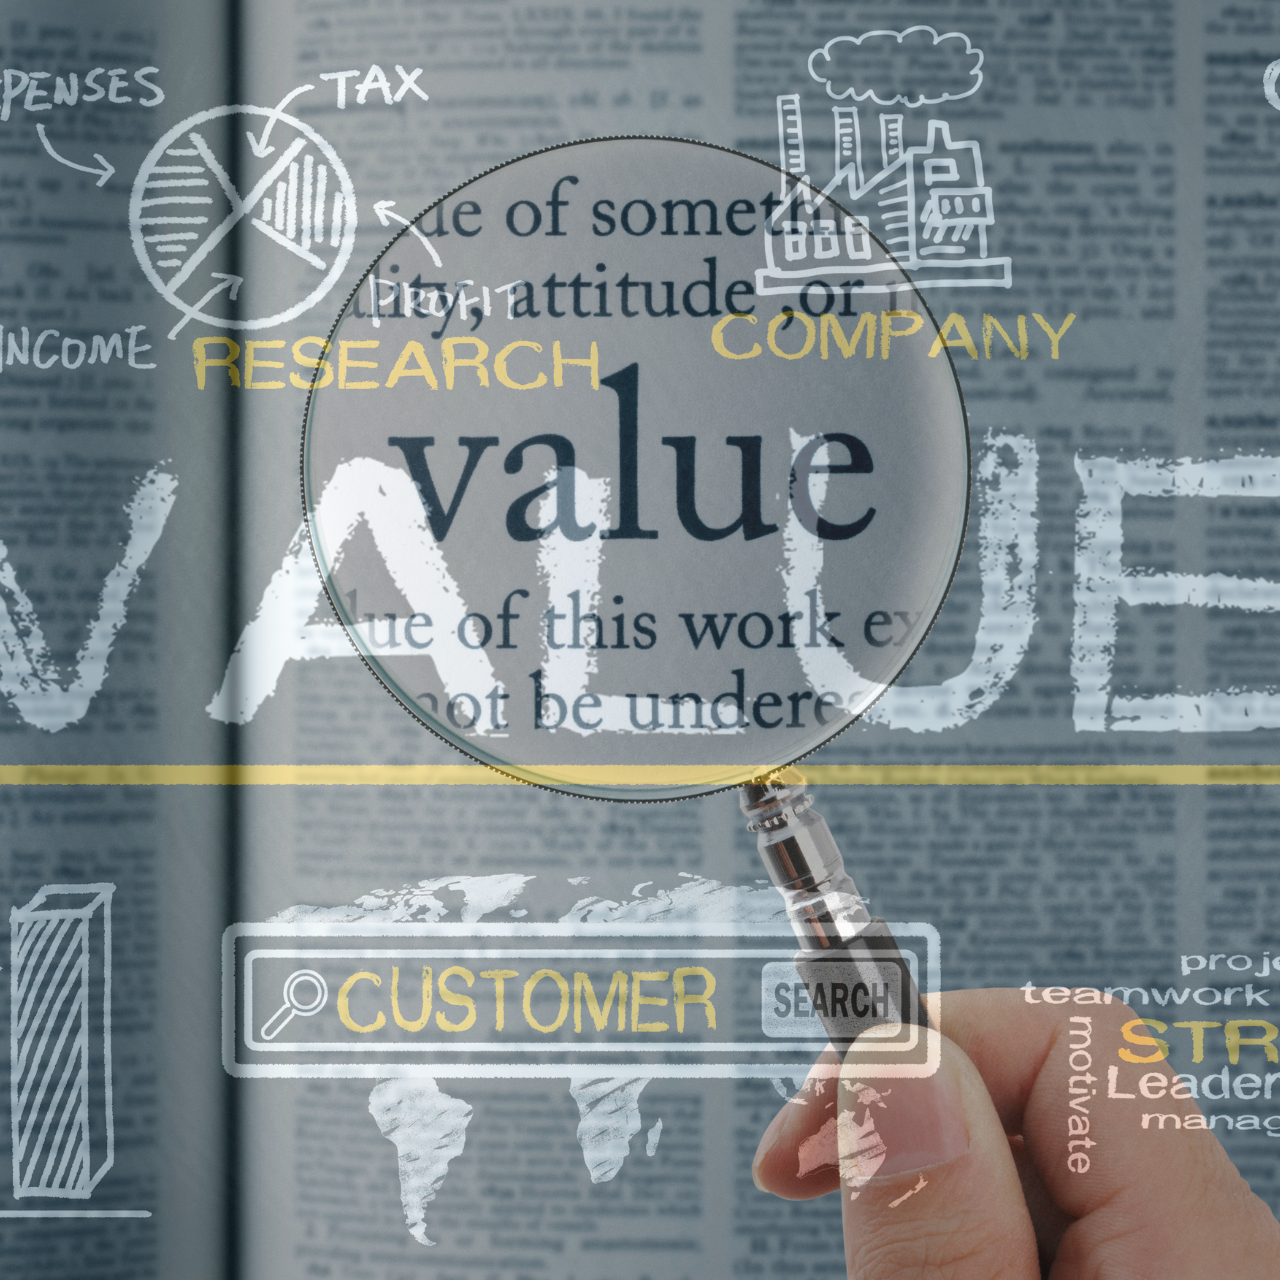 business Valuation